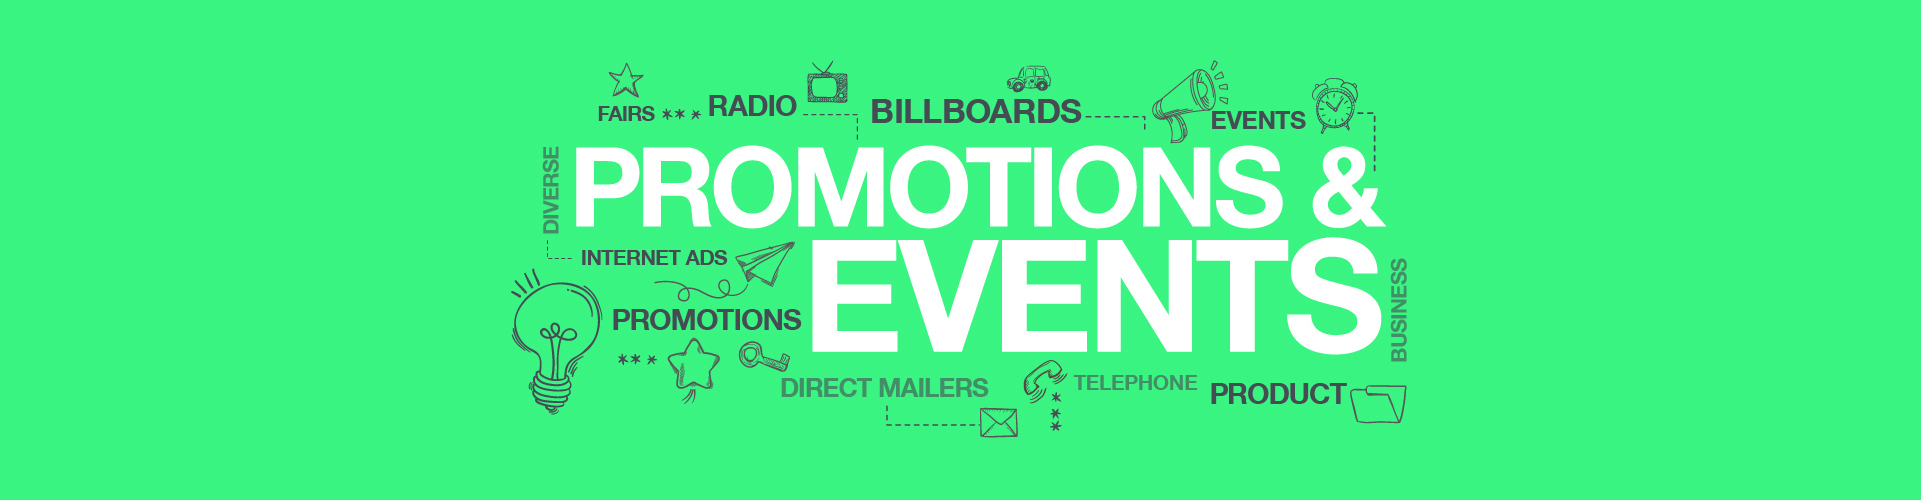 A green visual with Promotions and Events as the title. There are some words and icons surrounding the title that refer to the subject.